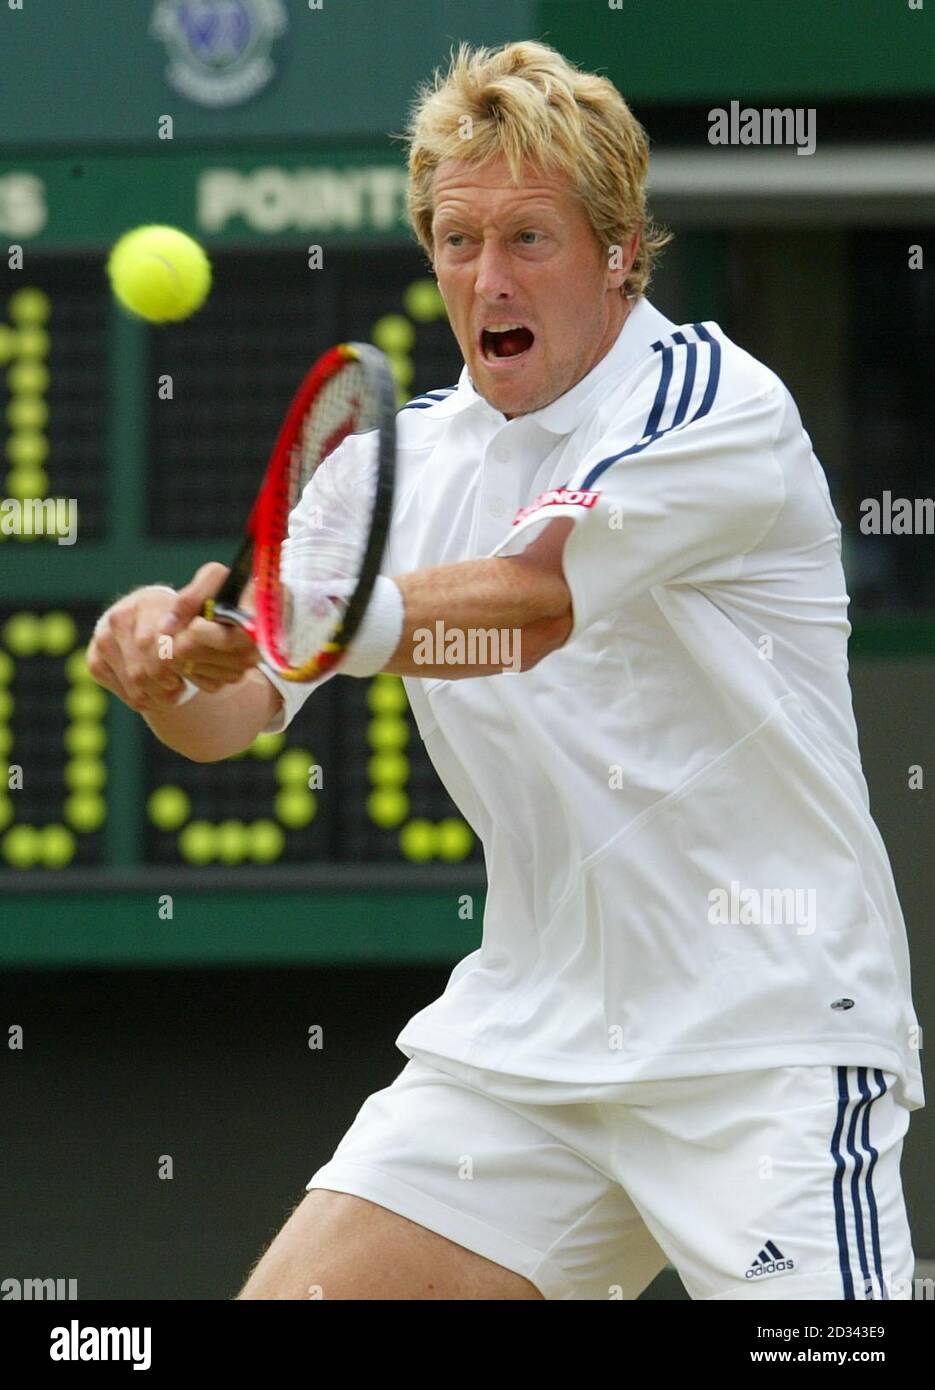 Jonas Bjorkman from Sweden in action against Andy Roddick from the USA during their quarter-final match at the All England Lawn Tennis Championships at Wimbledon. Stock Photo